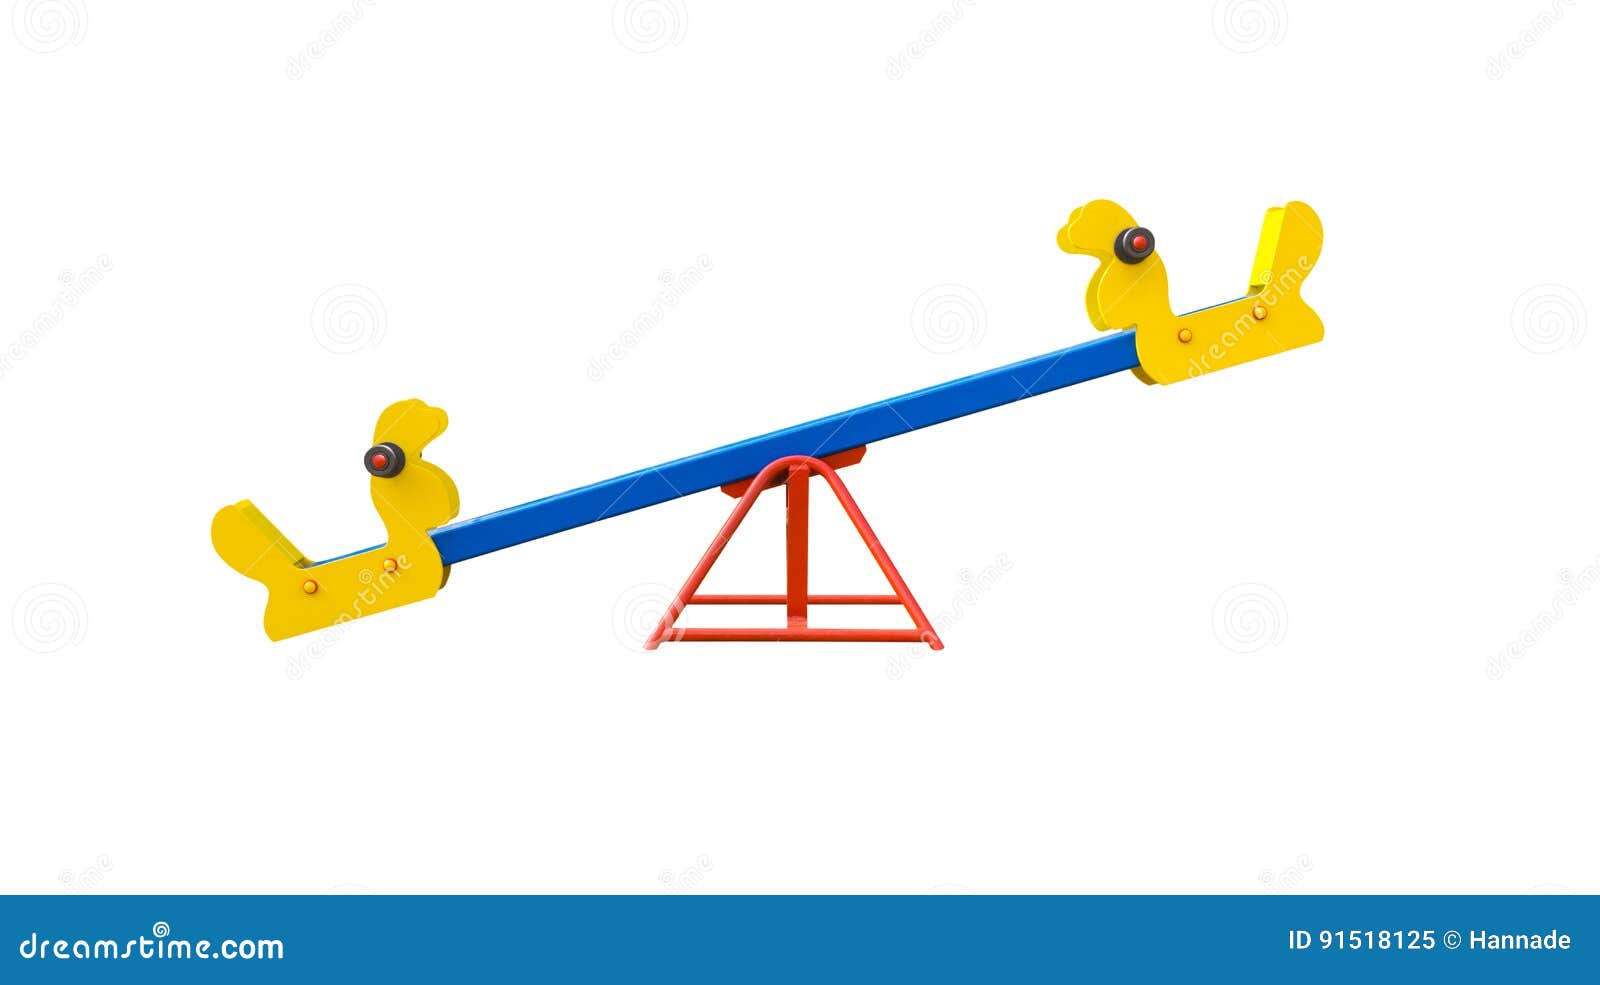 seesaw for playground